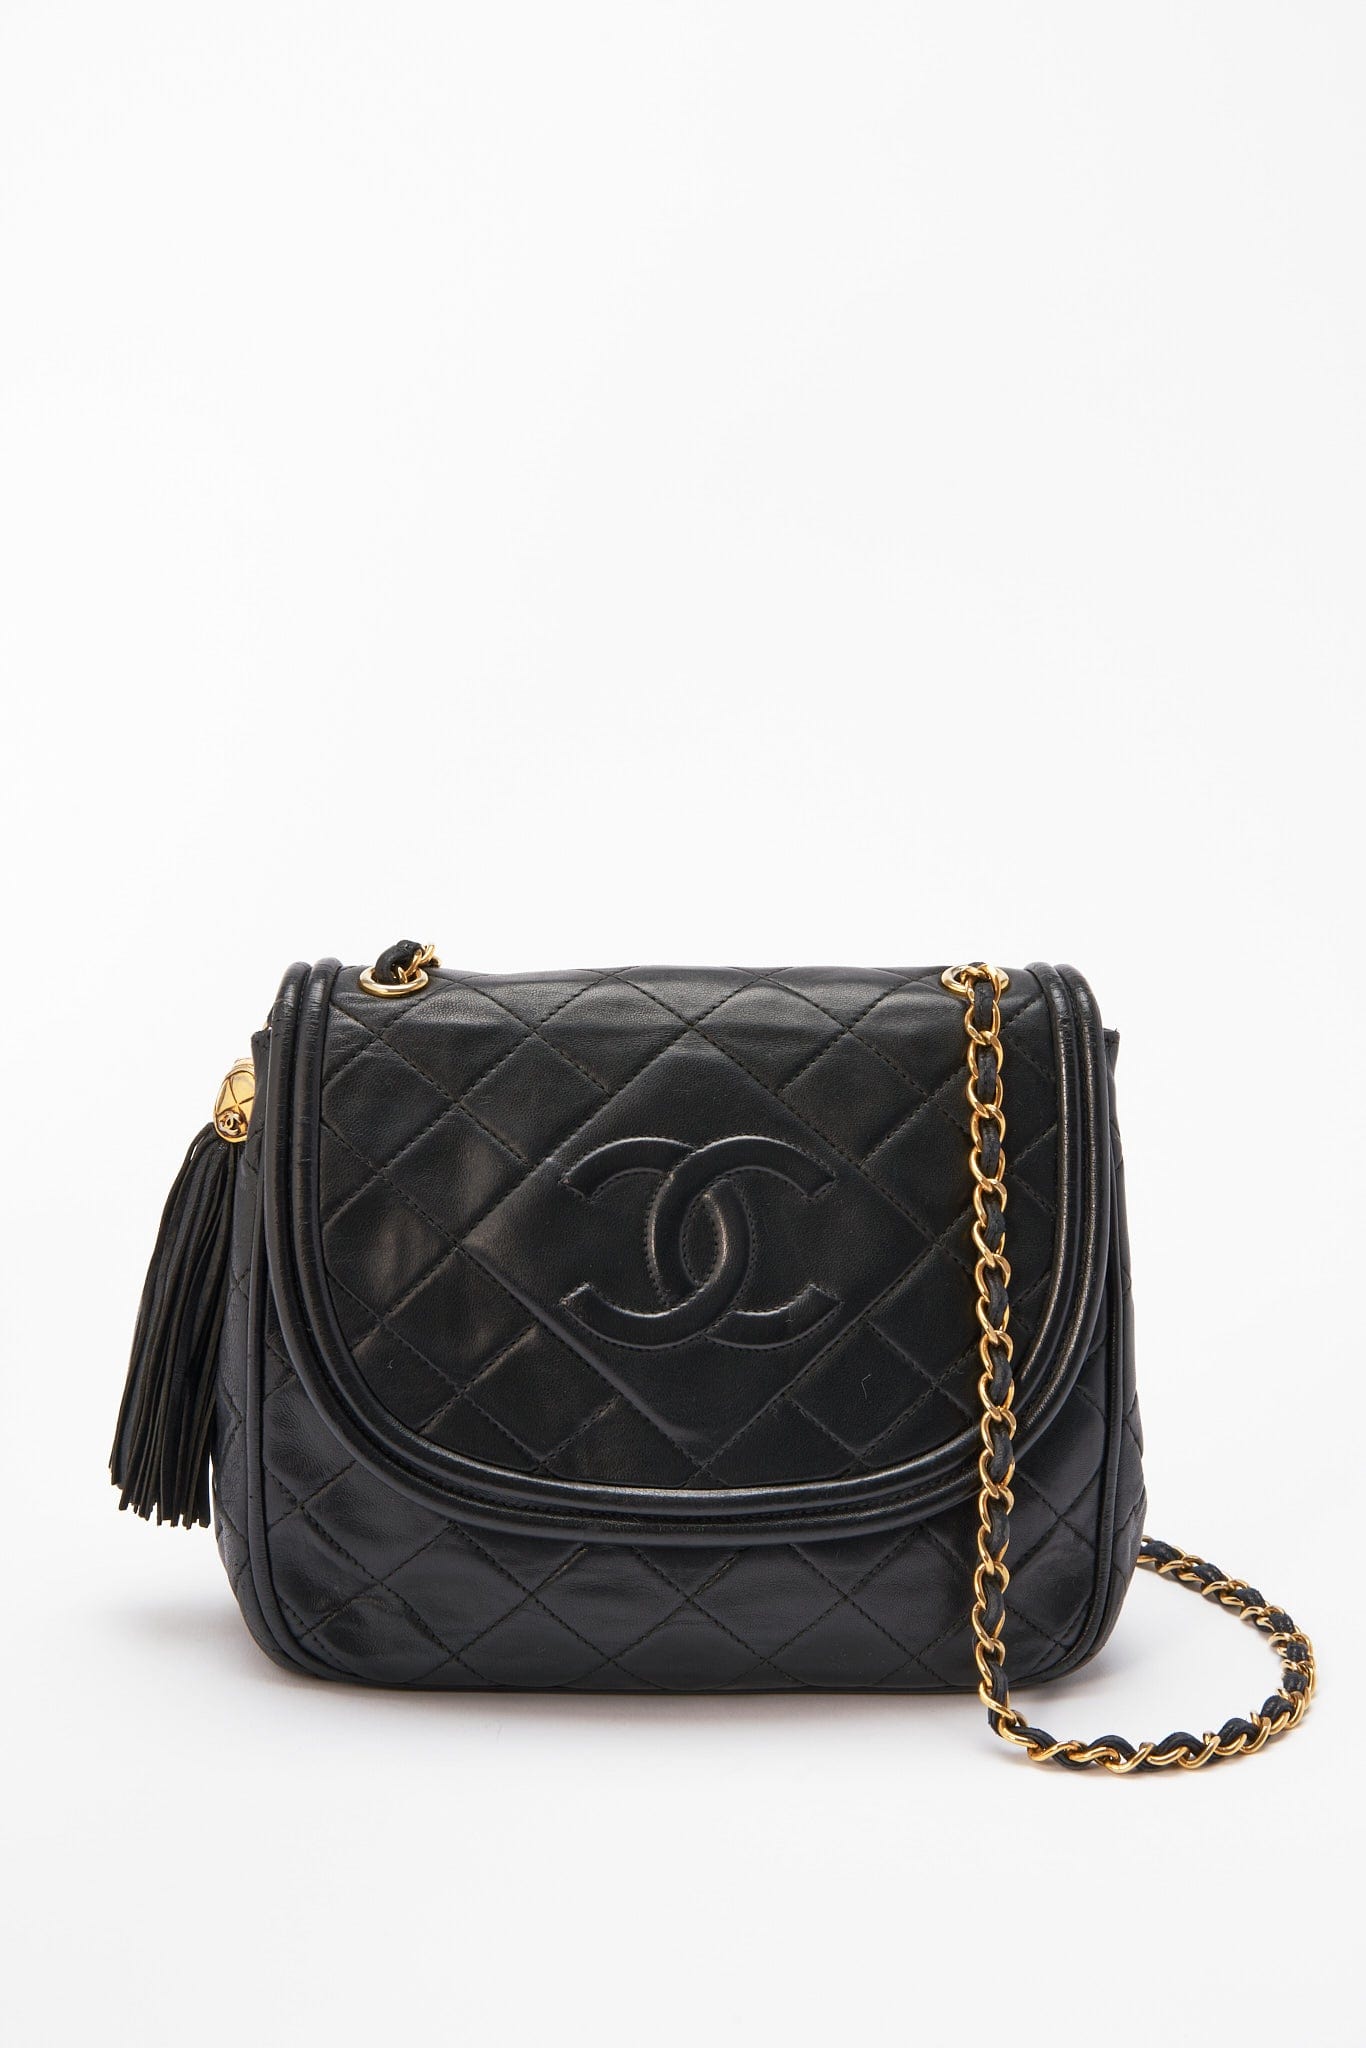 CHANEL, Bags, Chanel Black Quilted Lambskin Leather French Purse Wallet